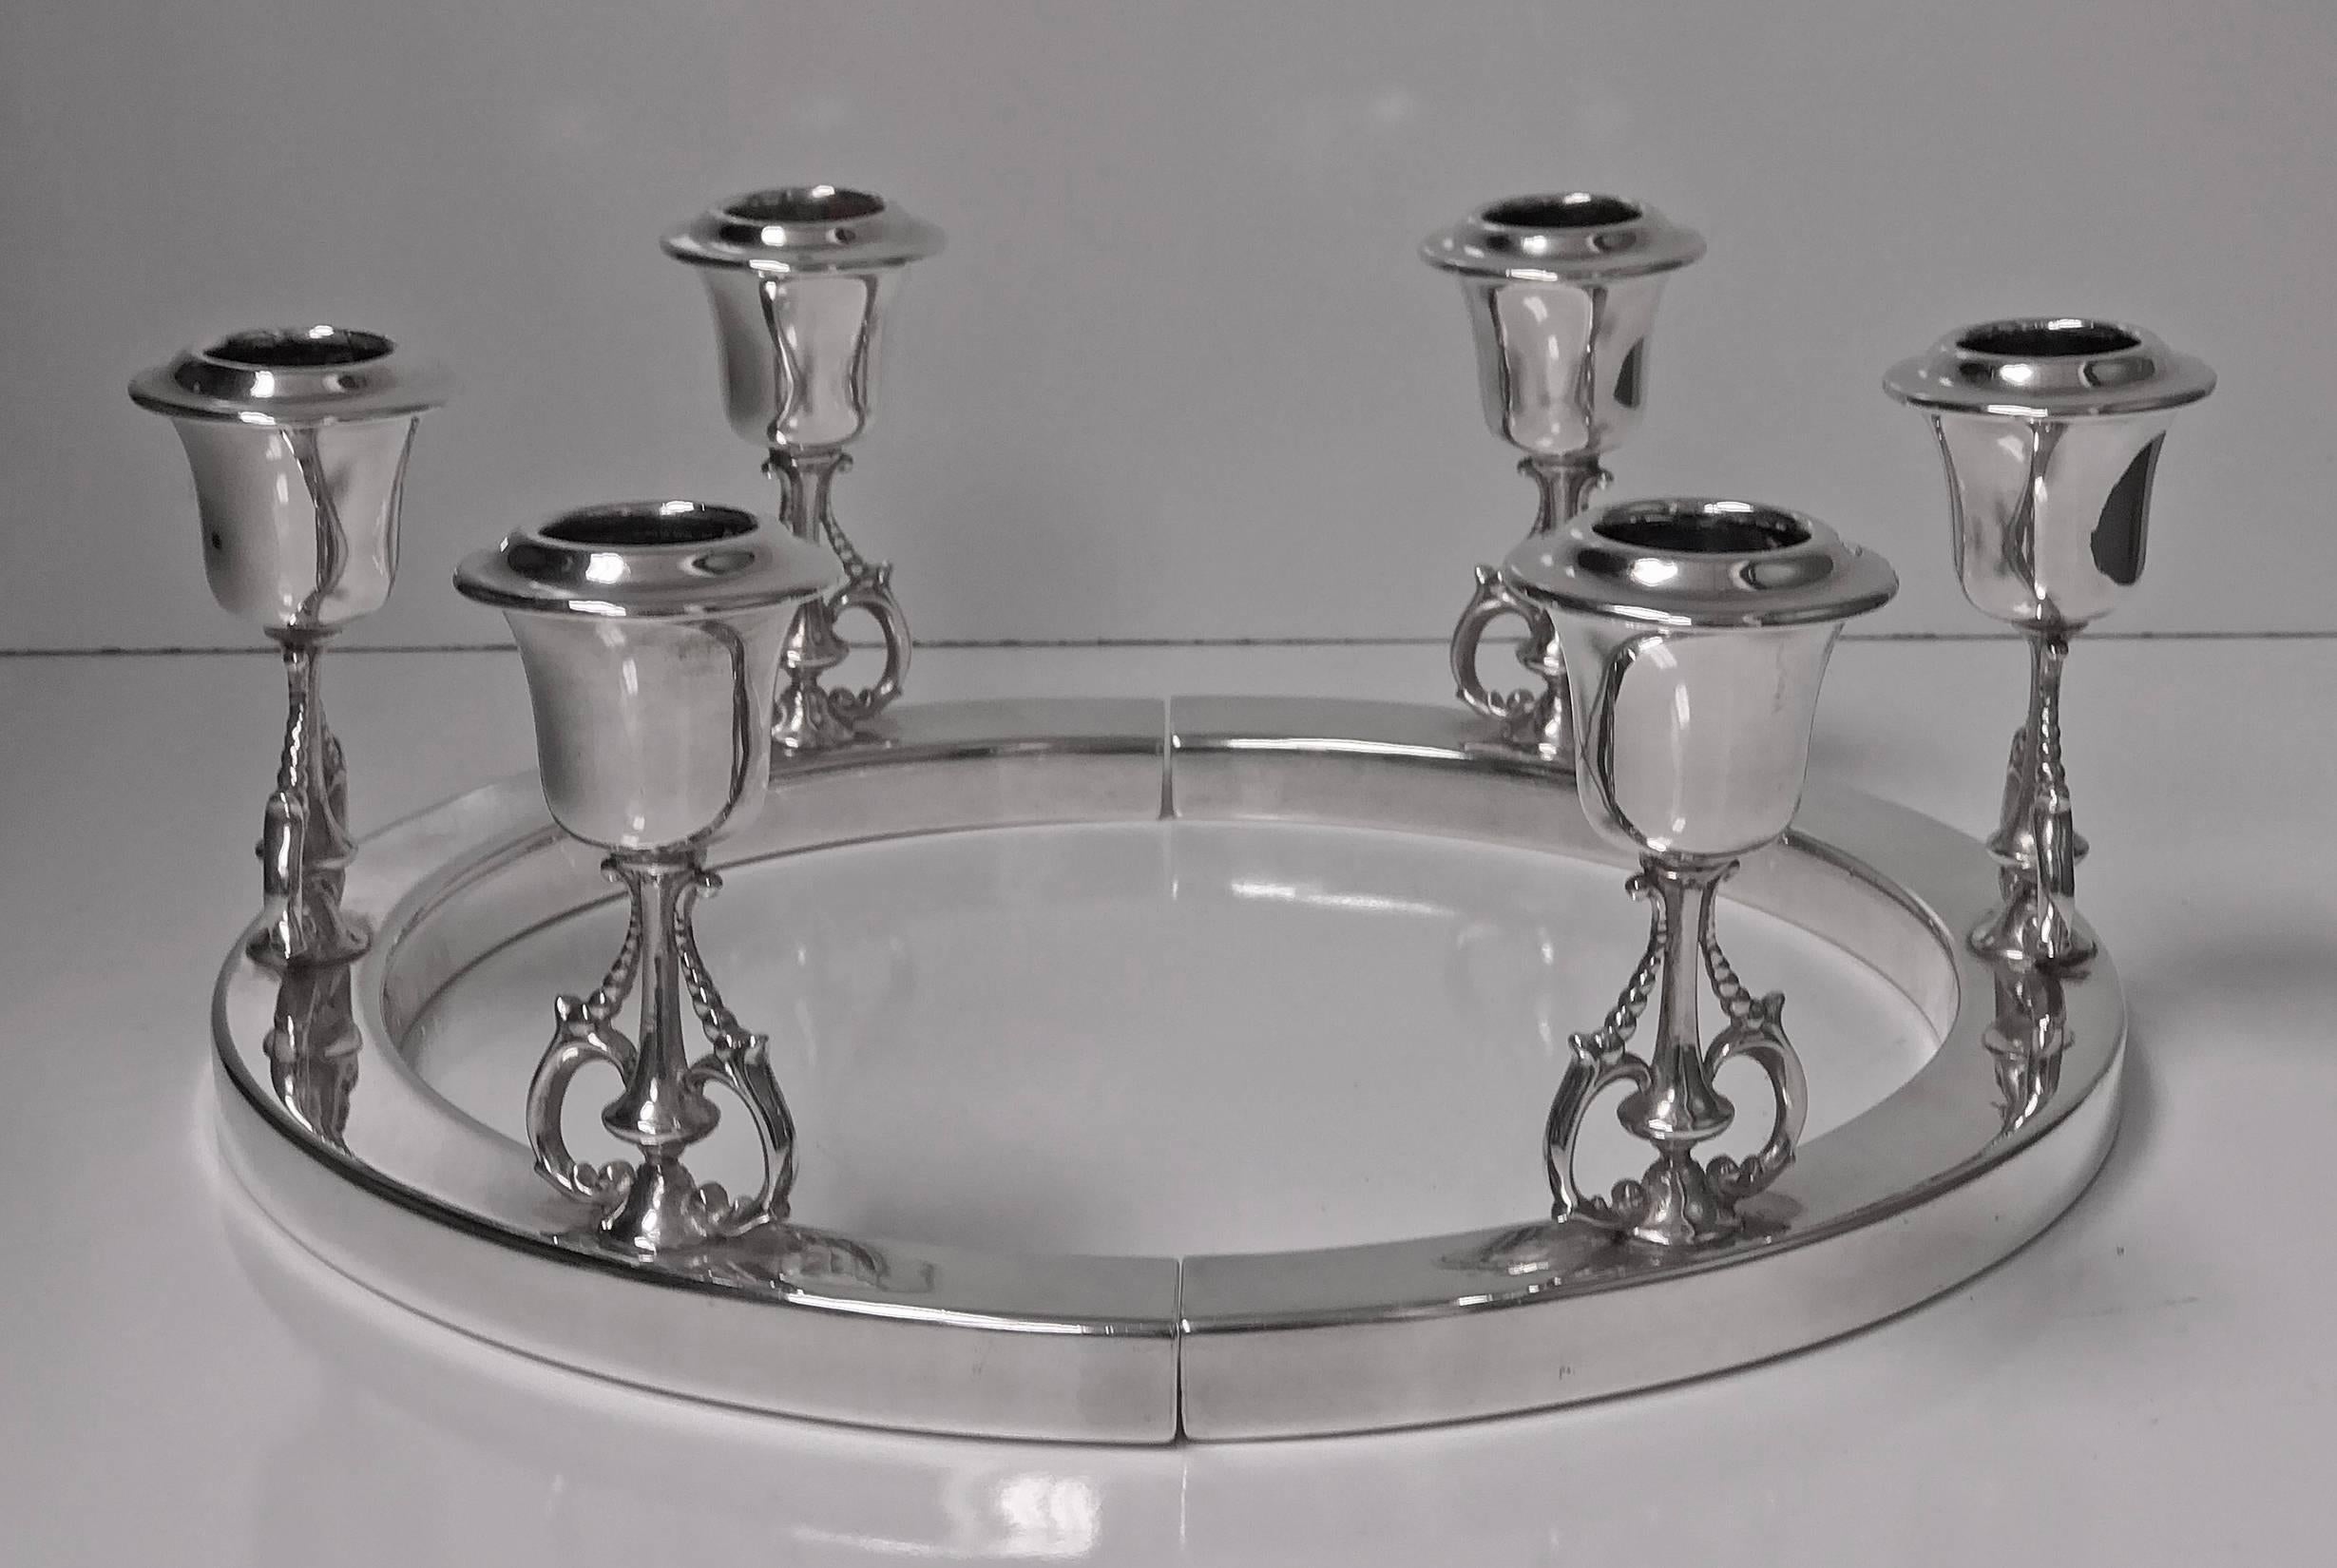 Pair of Art Deco American sterling candelabra candlesticks, New York, circa 1925, A.L. Wagner & Son. The candelabra of modernistic ‘Scandinavian’ design, each of a hemi spherical shape, together forming a fully rounded artistic design, on two hemi